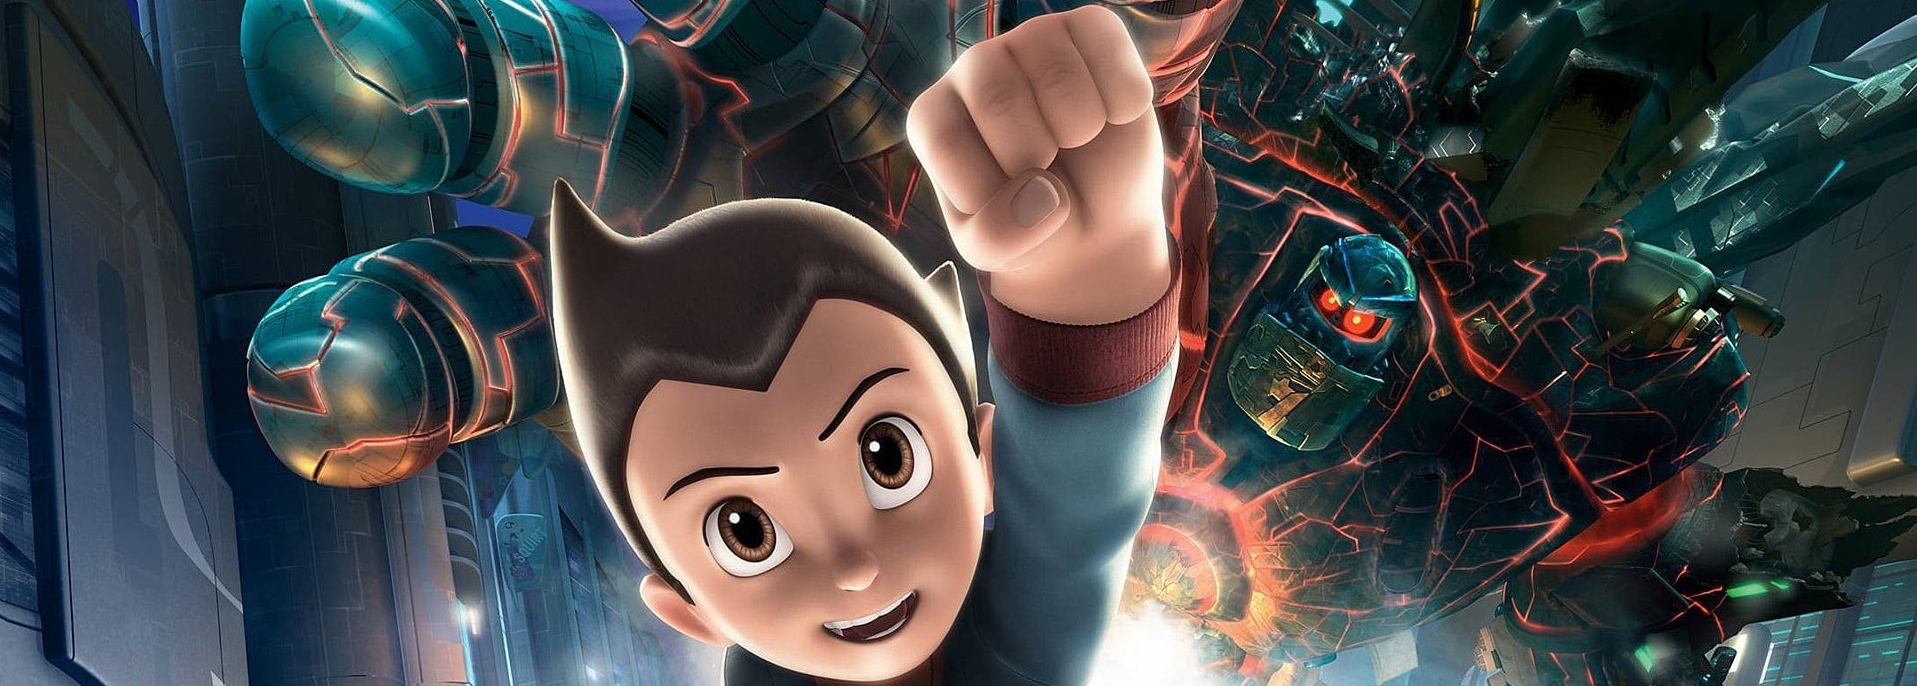 Banner Astro Boy The Video Game